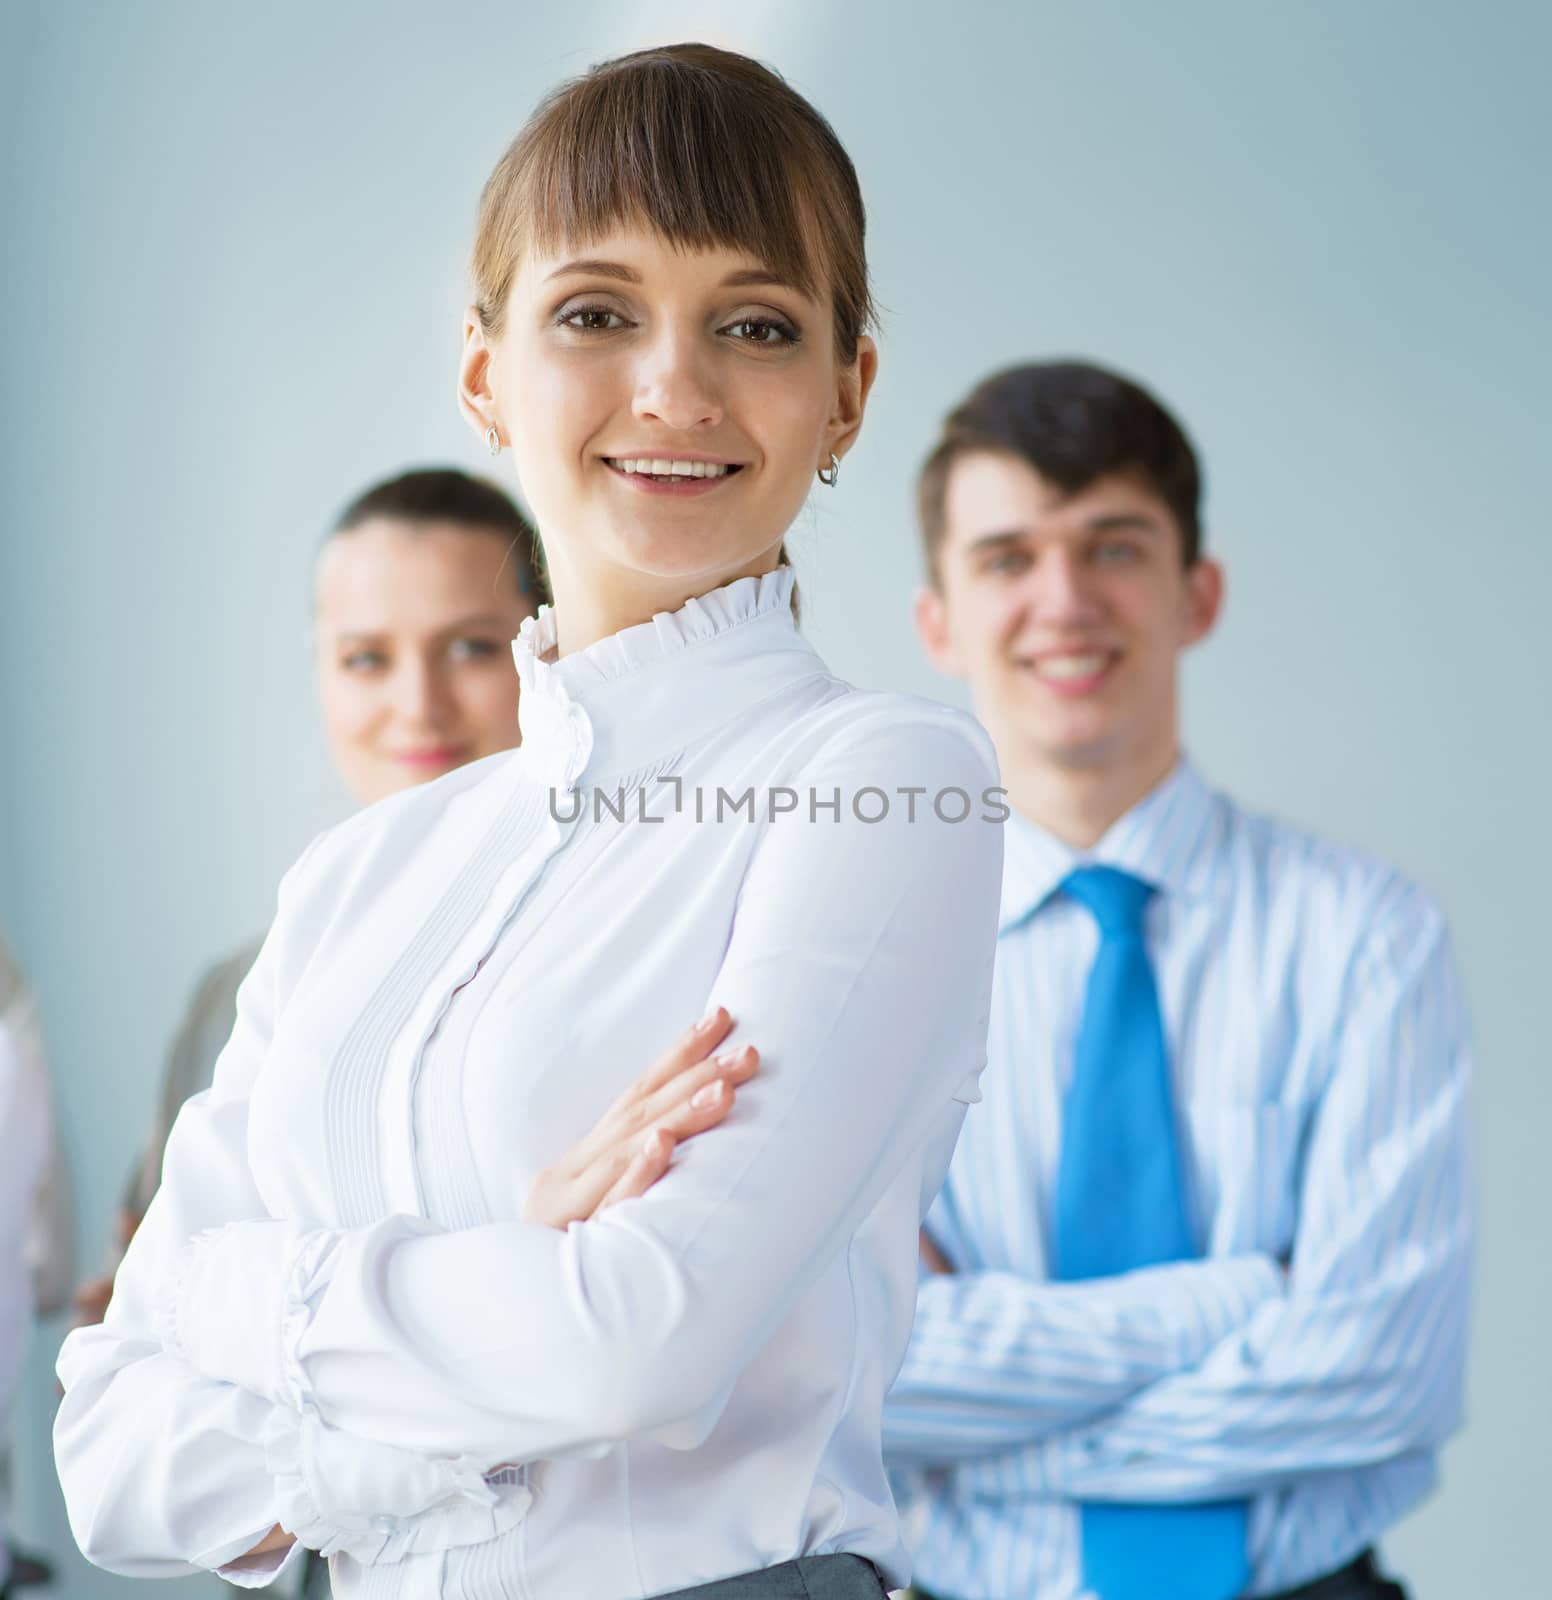 concept of teamwork, business woman crossed her arms over her team